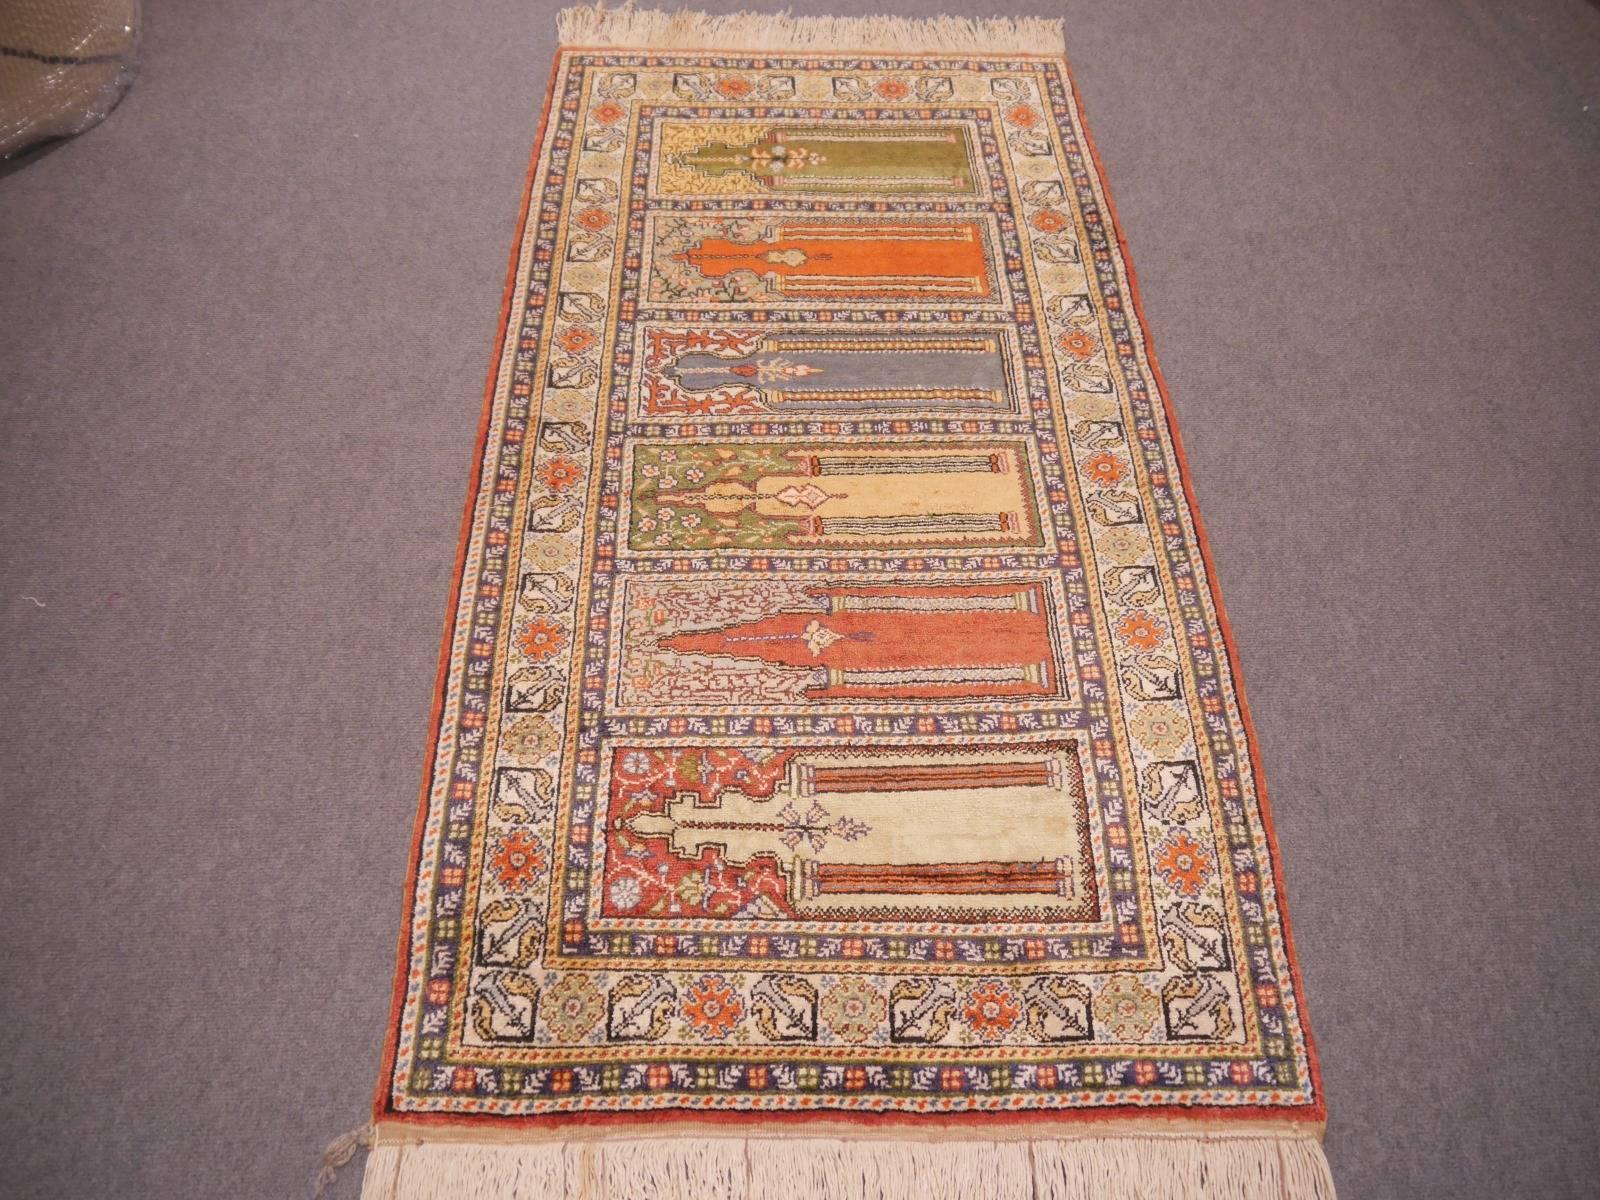 Beautiful Turkish Kayseri rug with multiple praying niches. Vibrant colors and lusterous flosh silk pile.